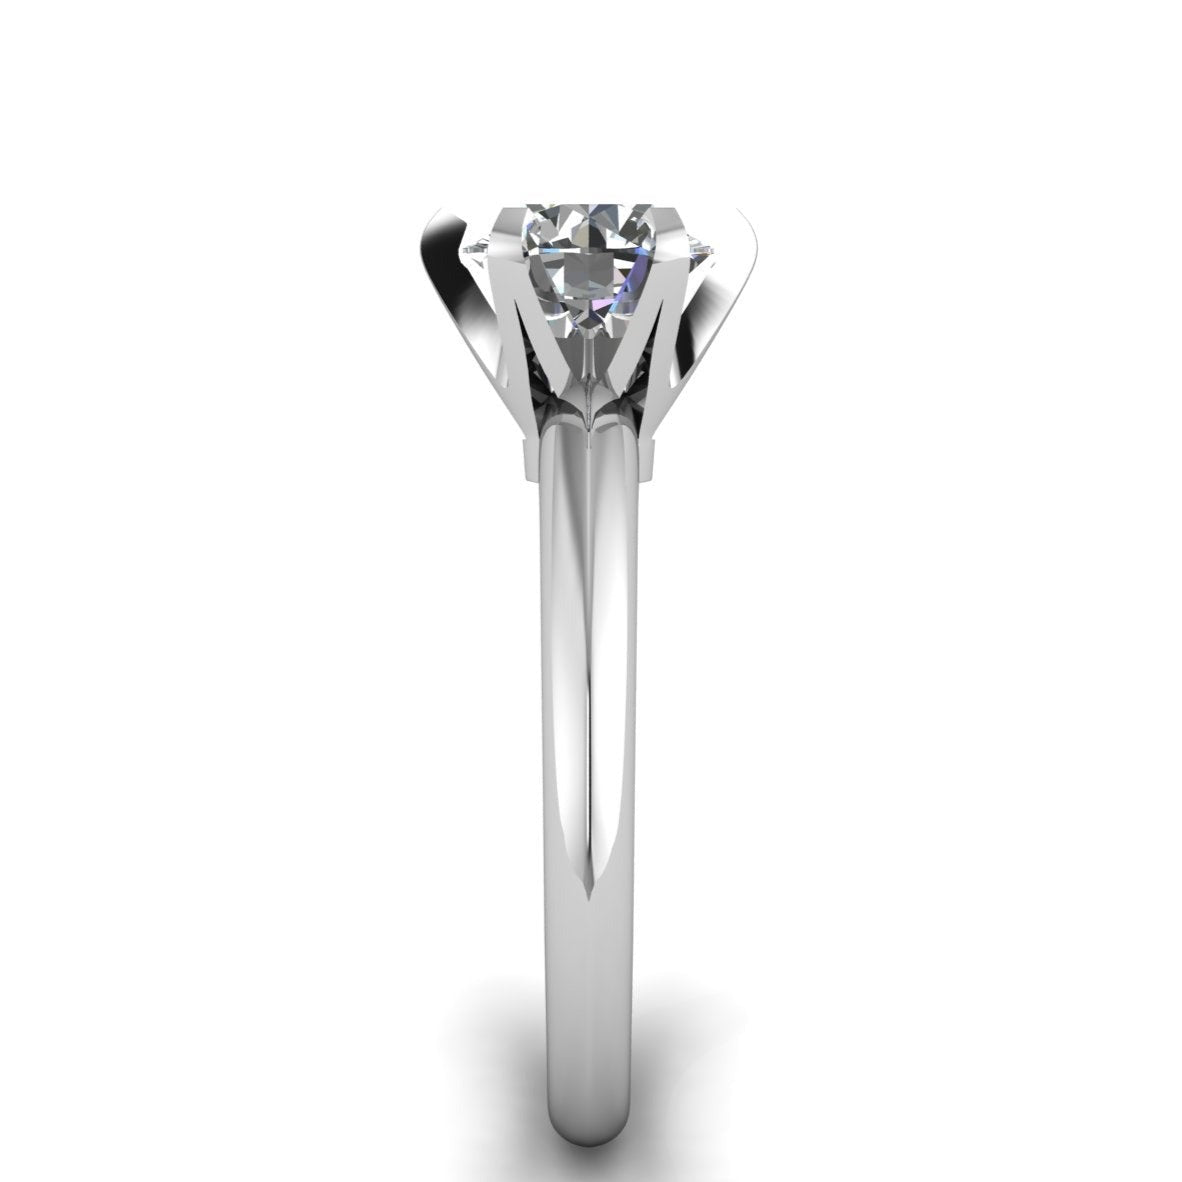 Round Cut 1CT Moissanite Ring, Classic 6 Prongs Wedding Ring, Solitaire Ring